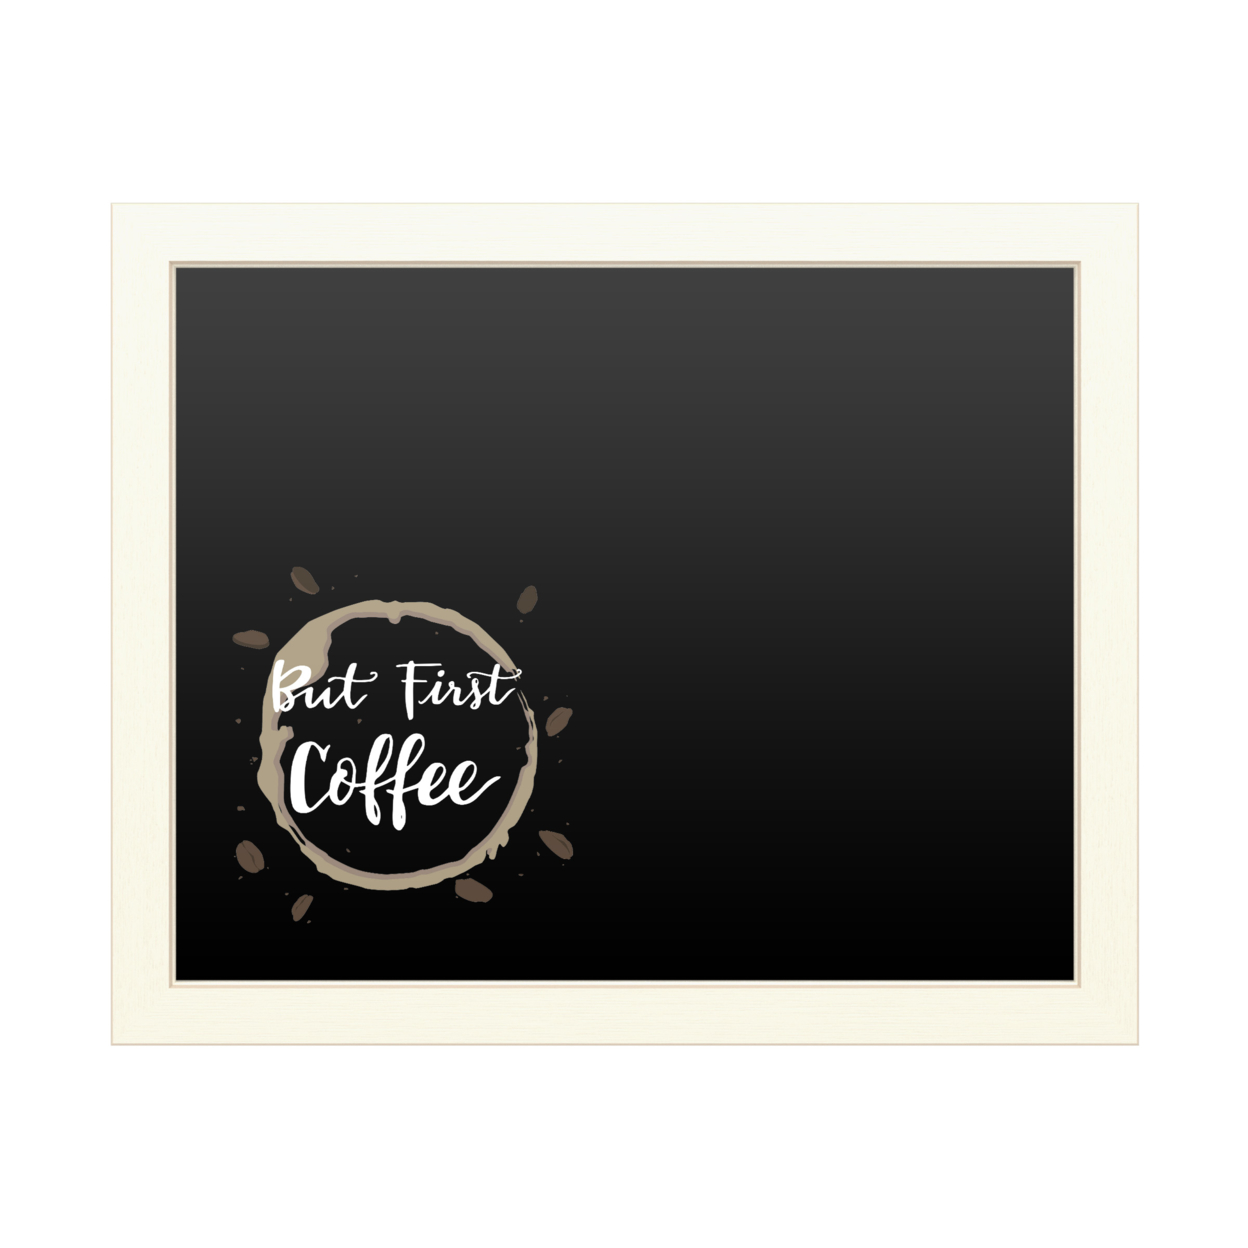 16 X 20 Chalk Board With Printed Artwork - But First Coffee White Board - Ready To Hang Chalkboard